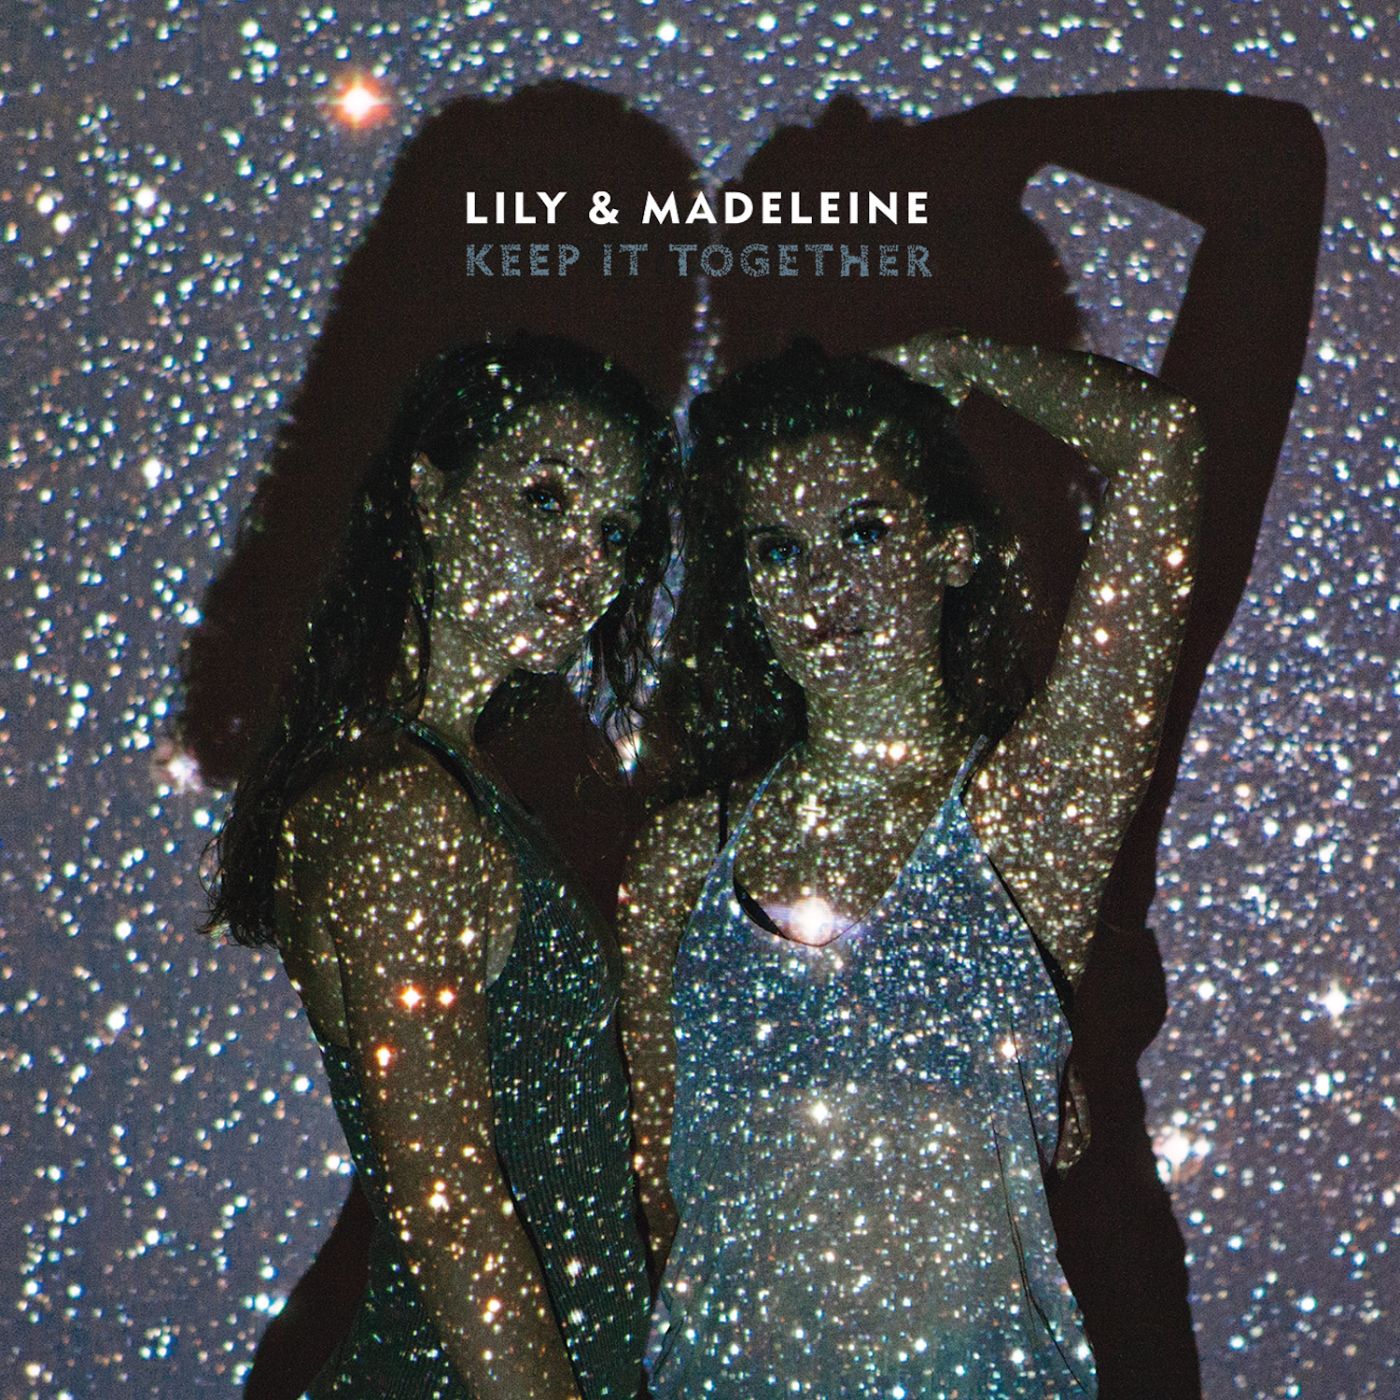 Lily & Madeleine | Keep It Together | CD